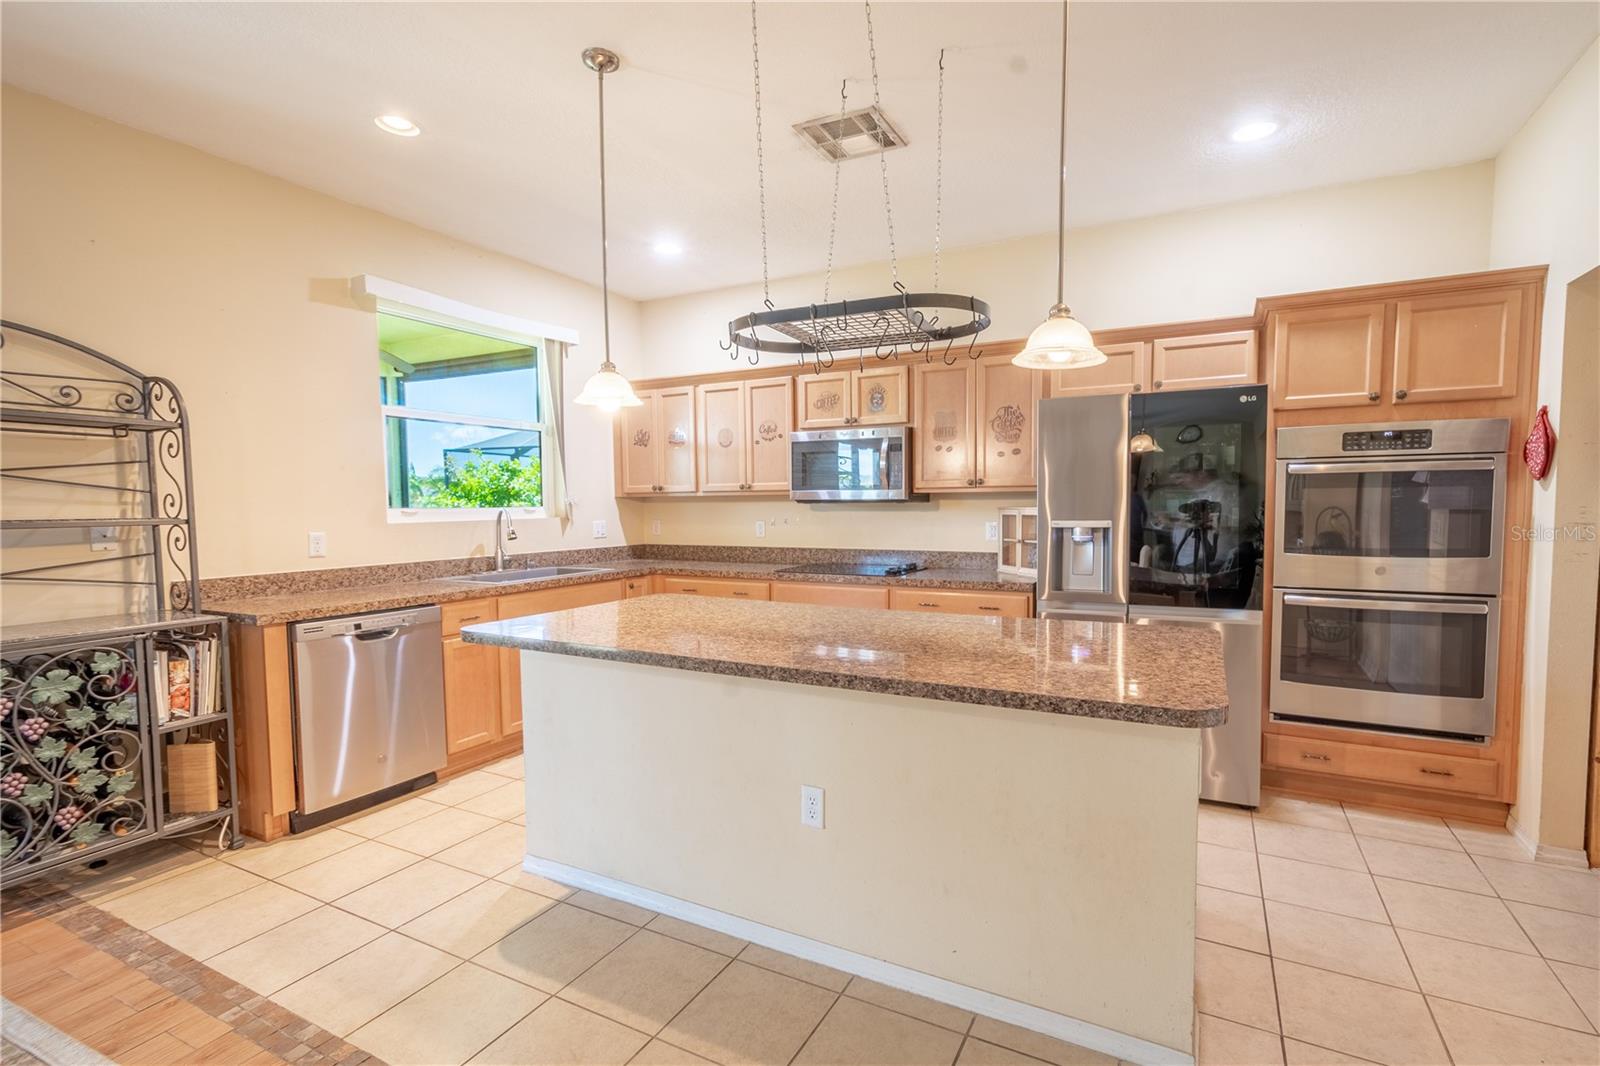 The kitchen features a large island and breakfast bar, with a granite countertop and additional storage.